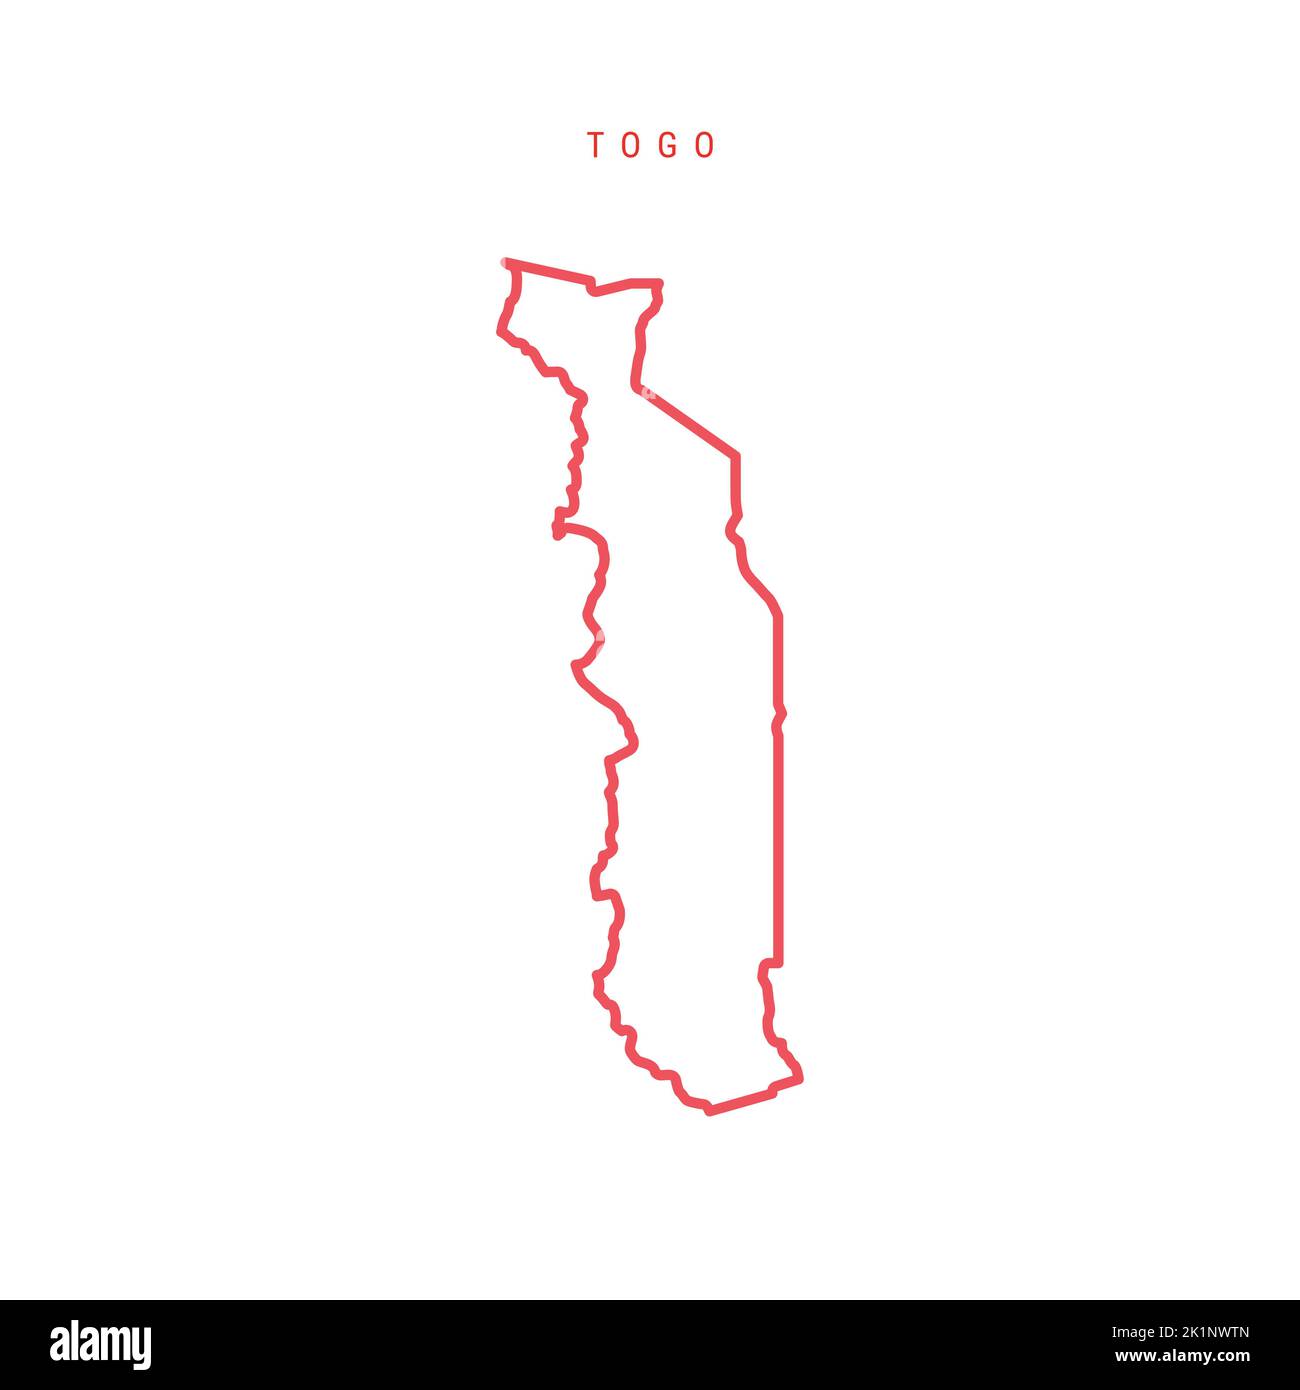 Togo editable outline map. Togolese Republic red border. Country name. Adjust line weight. Change to any color. Vector illustration. Stock Vector